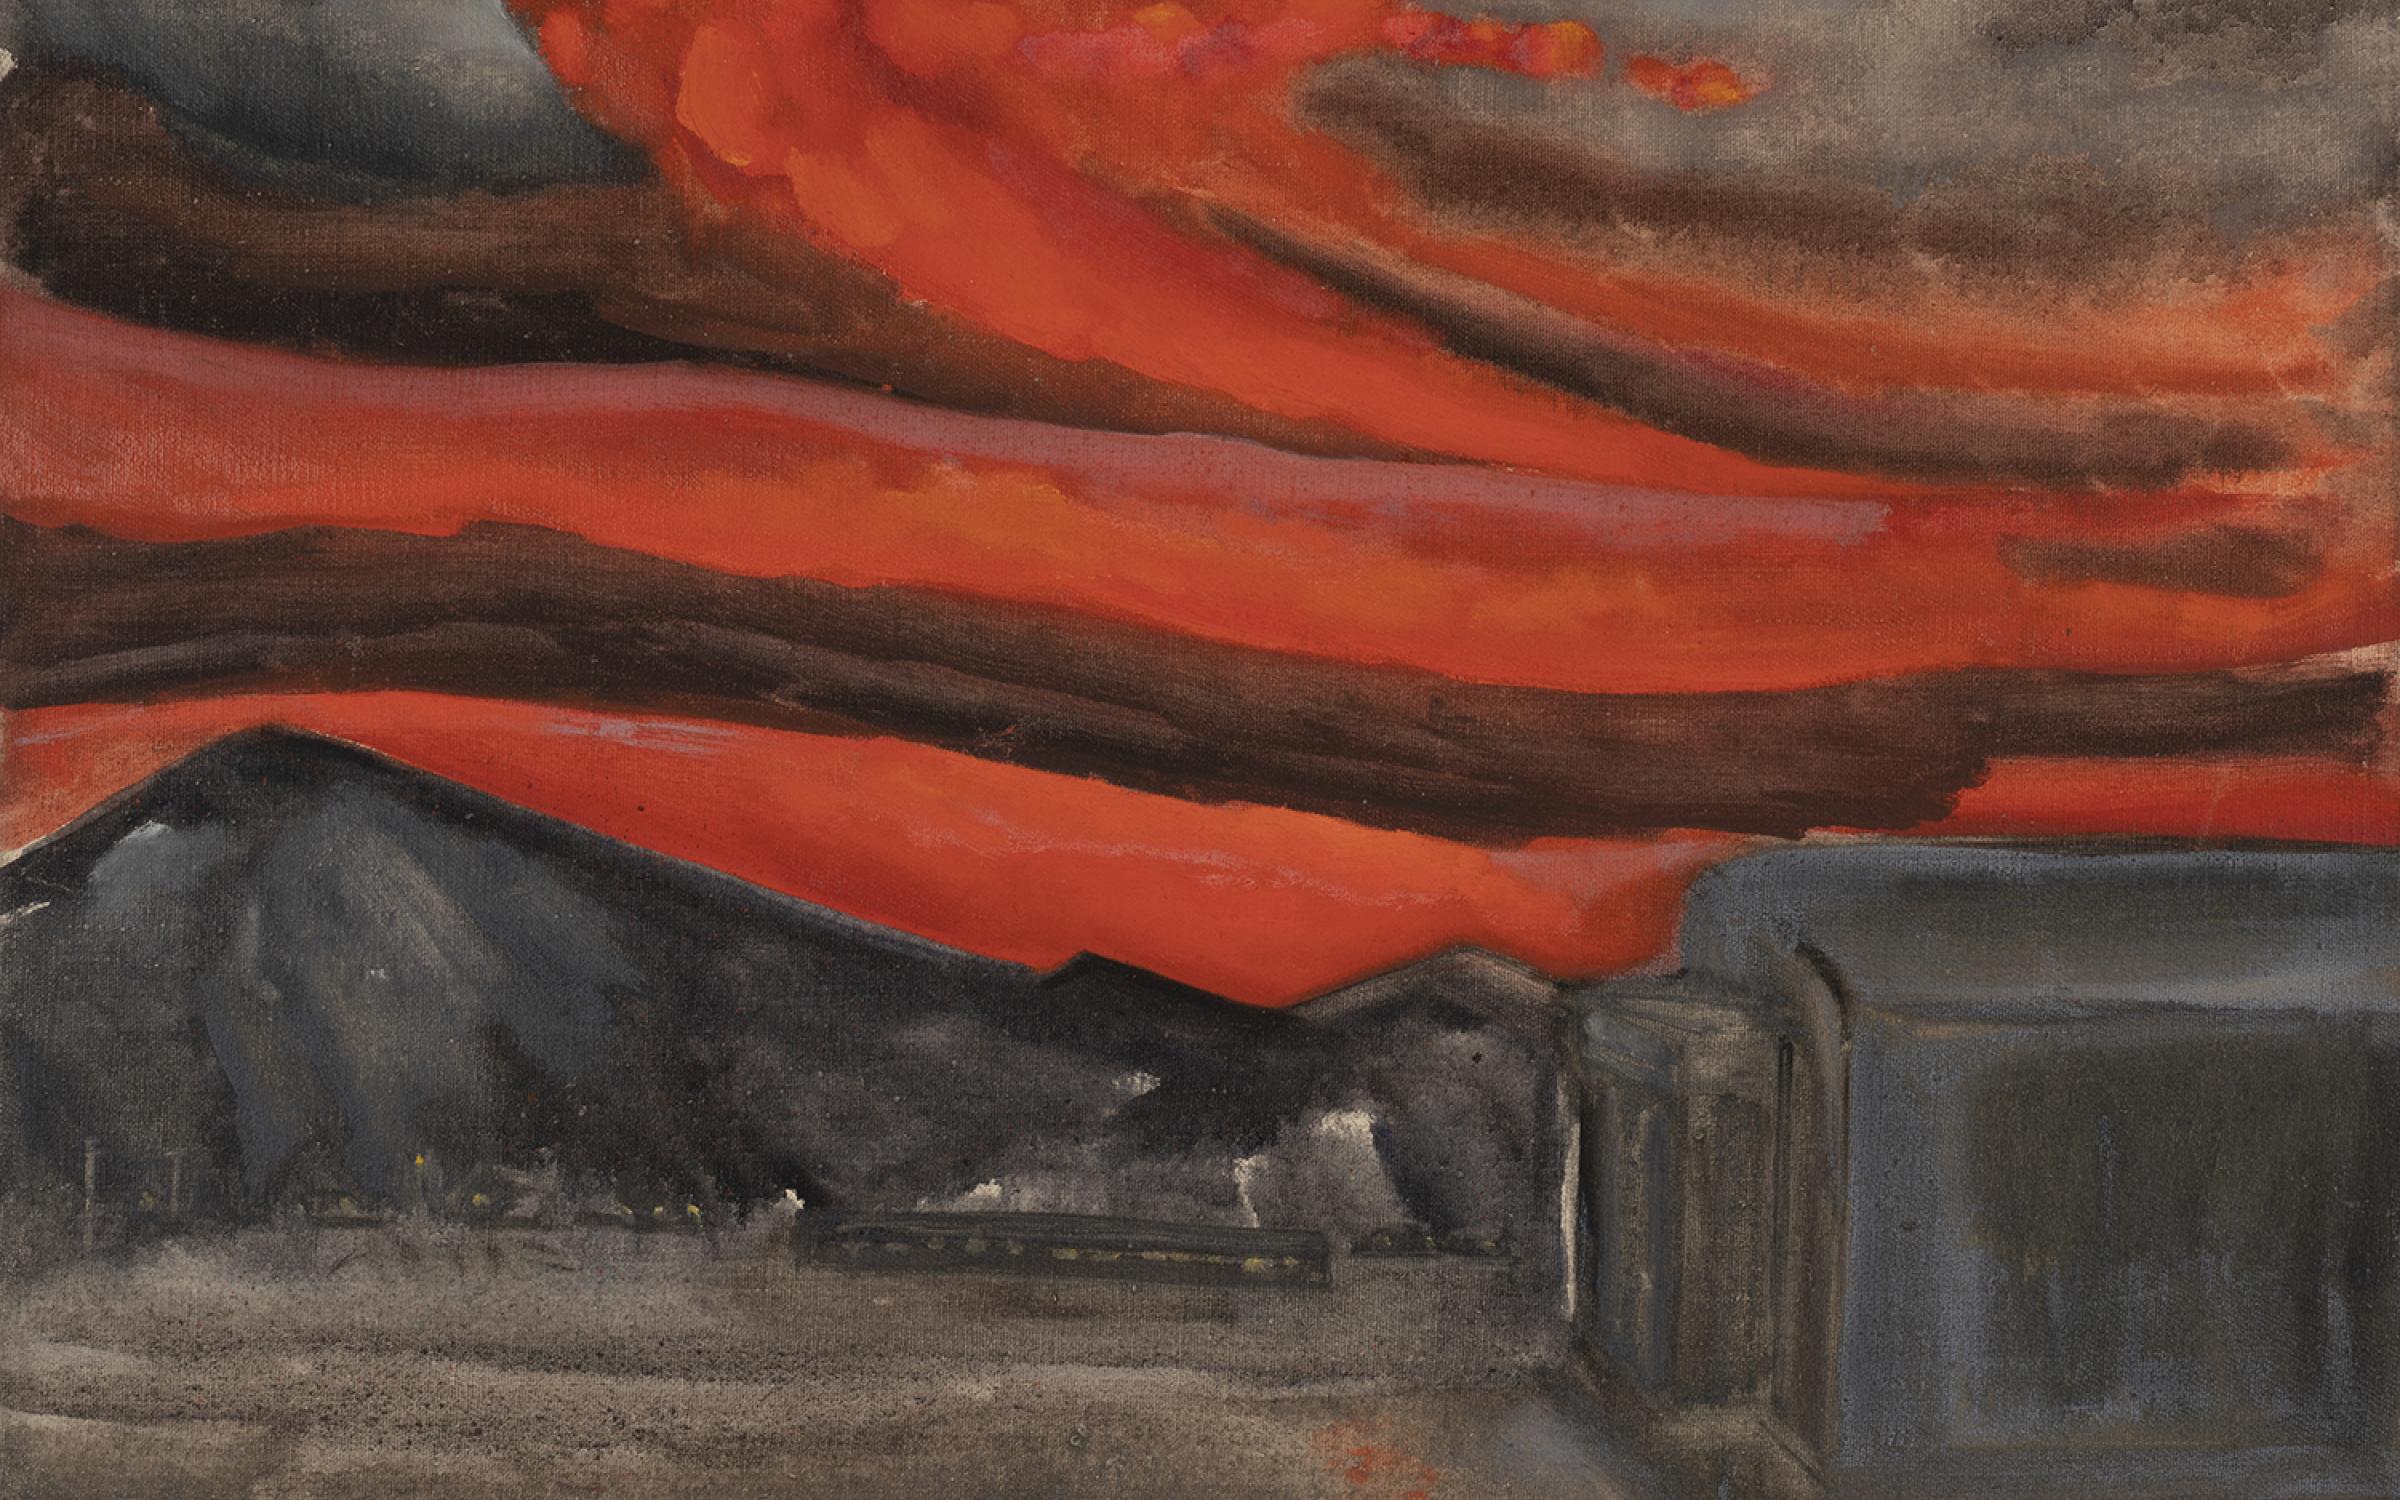 a painting of an interment camp wtih rows of wood shacks leading into a gray desert there is a red, stormy sky above